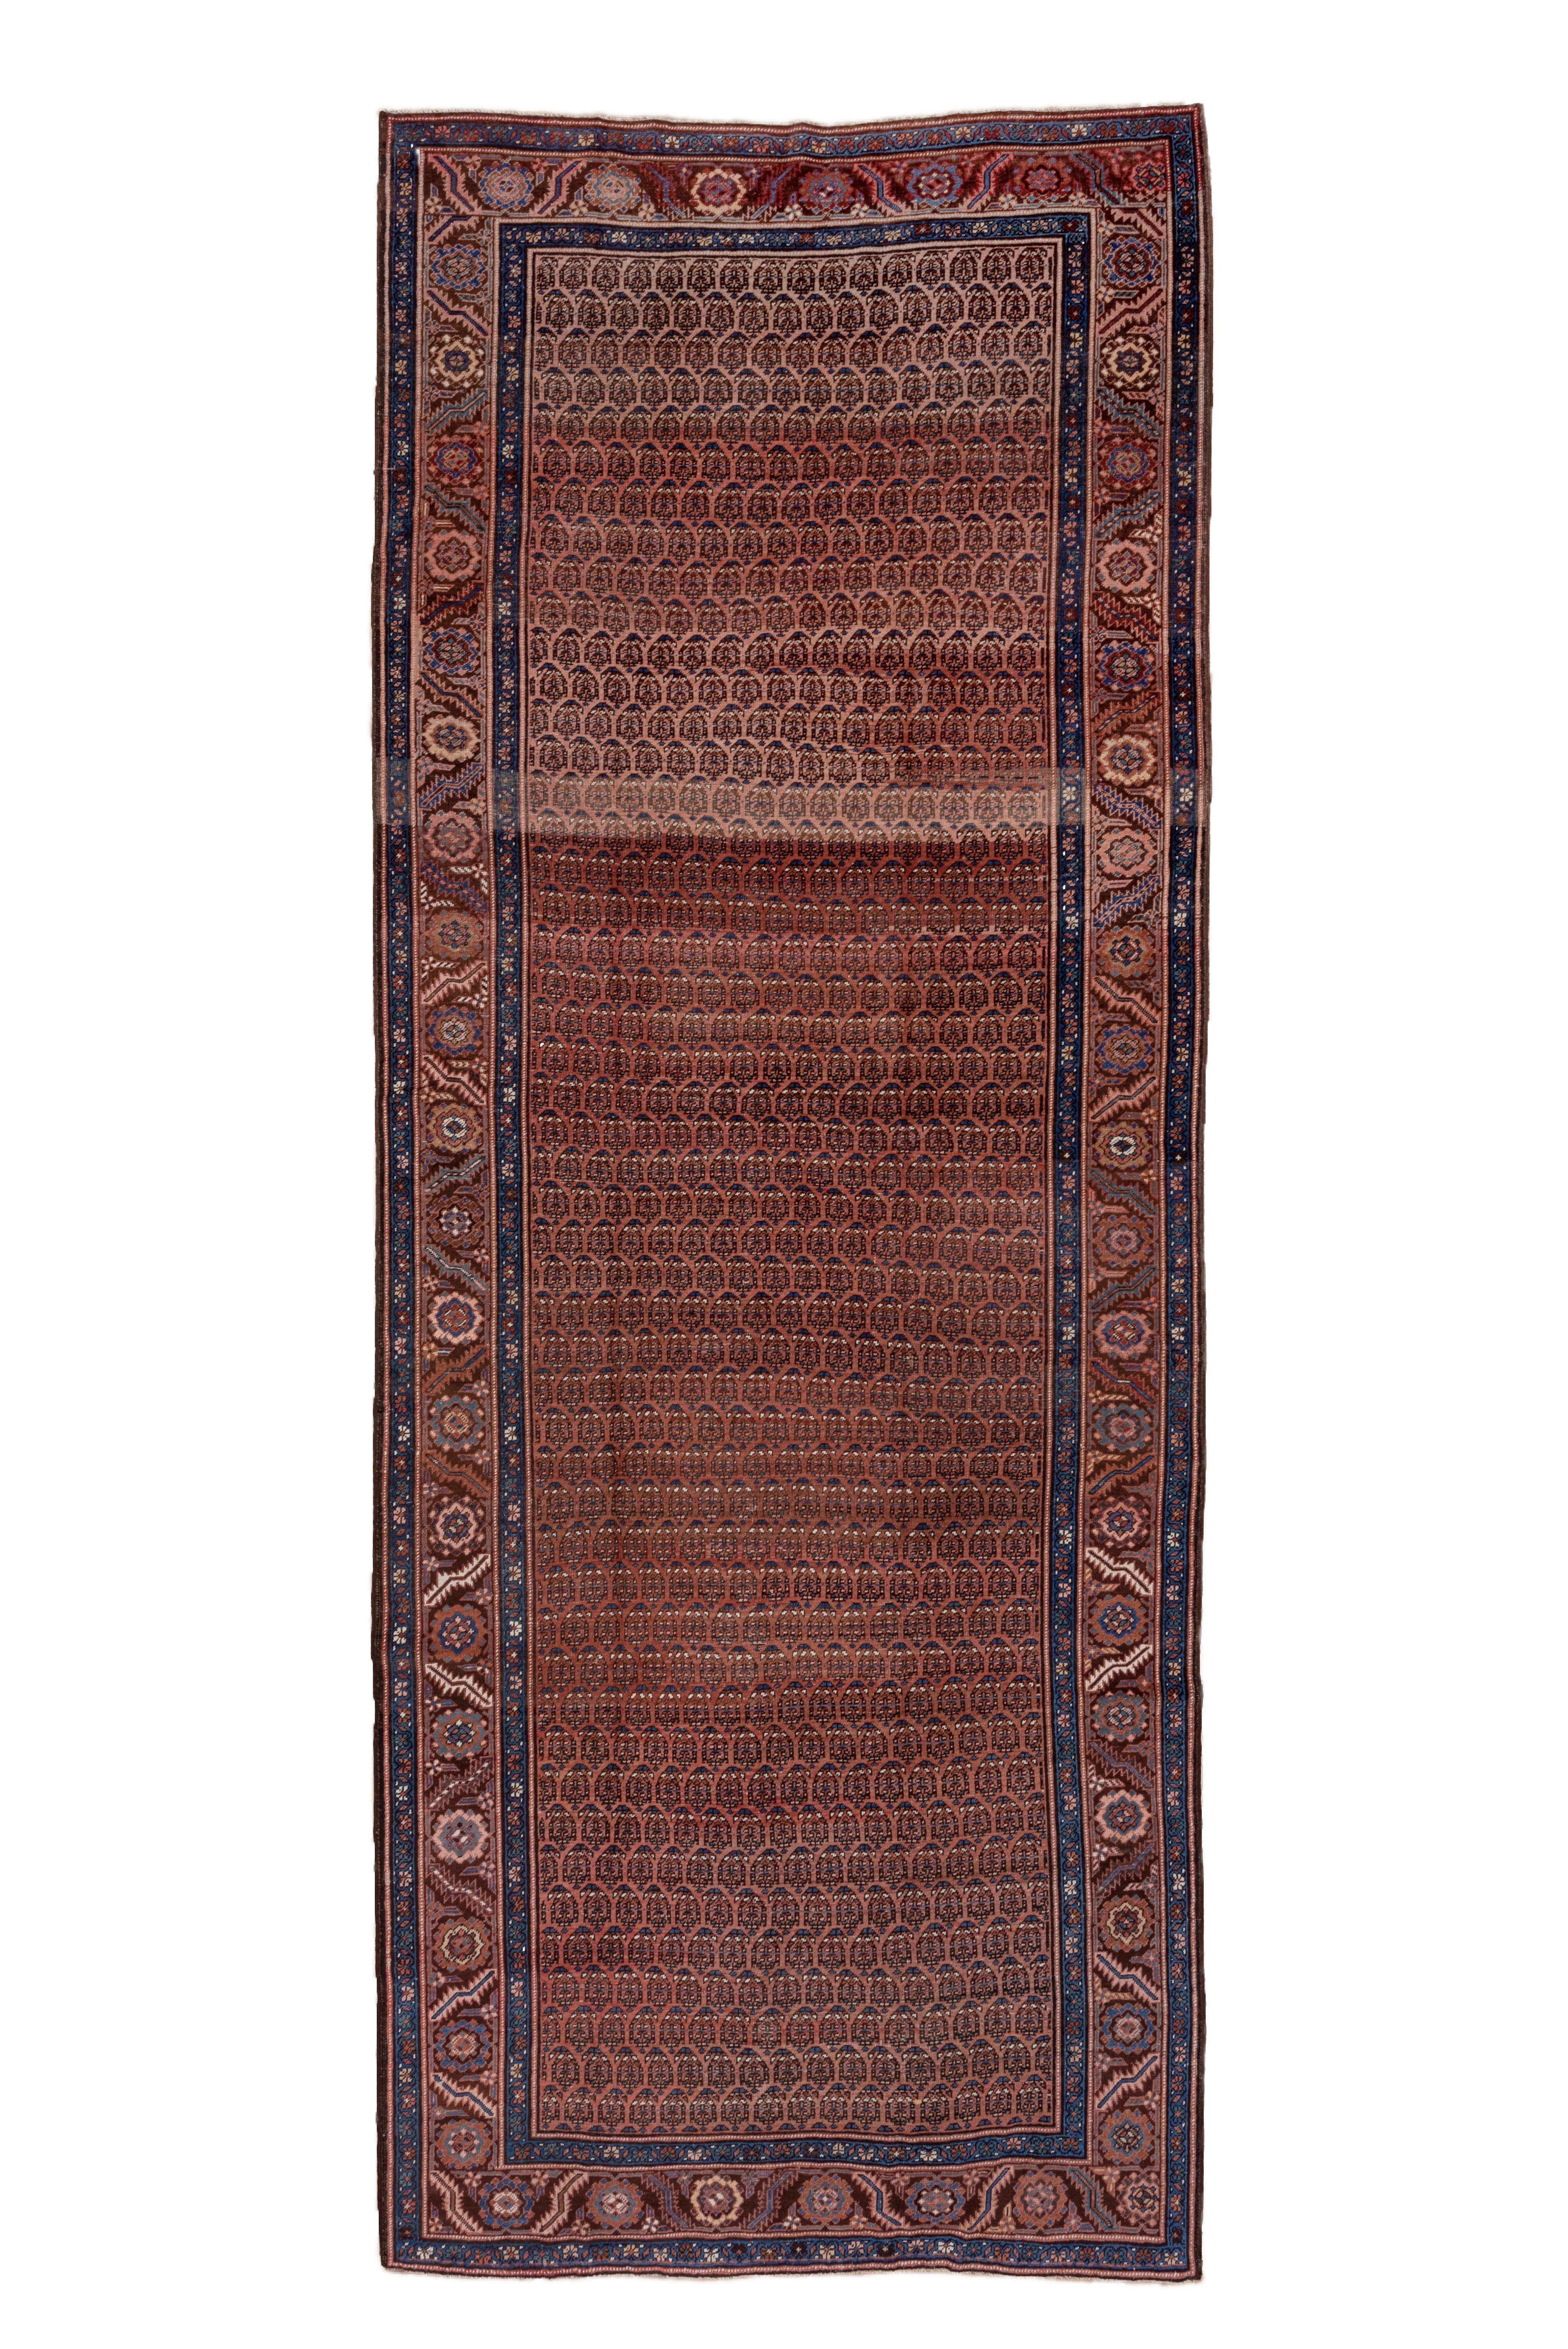 Rows and rows and rows of reversing botehs give a rhythm to the camel-tone field of this pre-export rustic kellegi (long rug). Visible abrash.  Madder strip style border of nested rosettes and doubly bent leaves. Generally good condition for the age